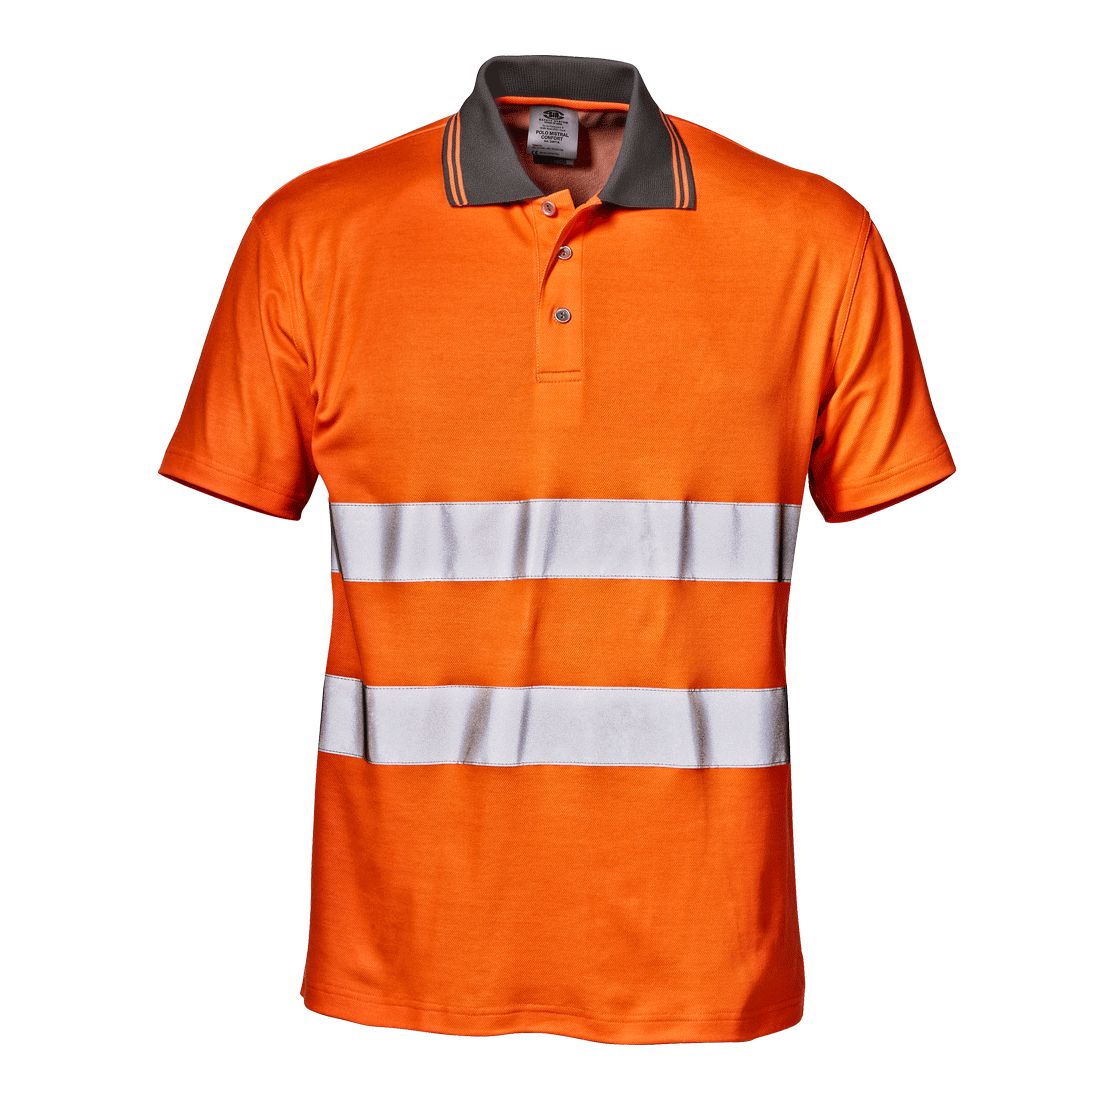 POLO-SHIRT MISTRAL CONFORT